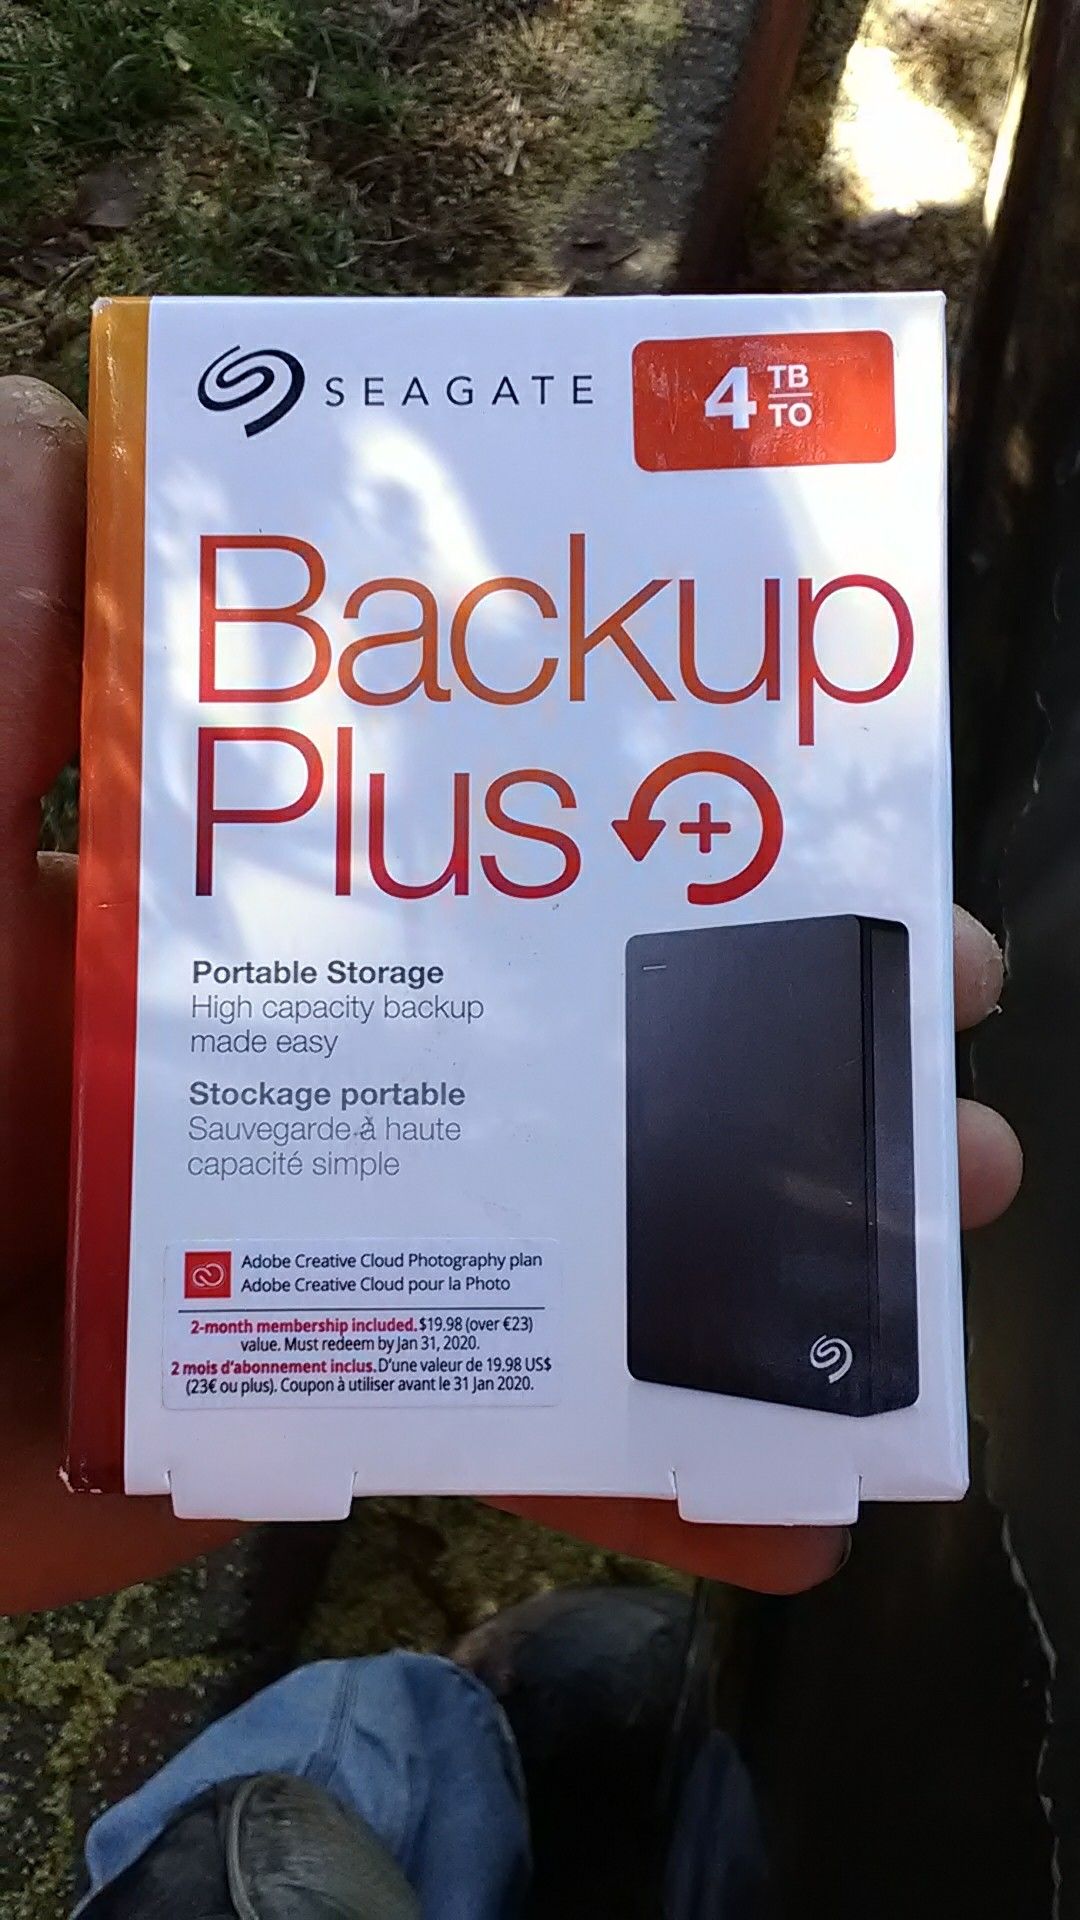 Seagate 4tb back up plus brand new never opened